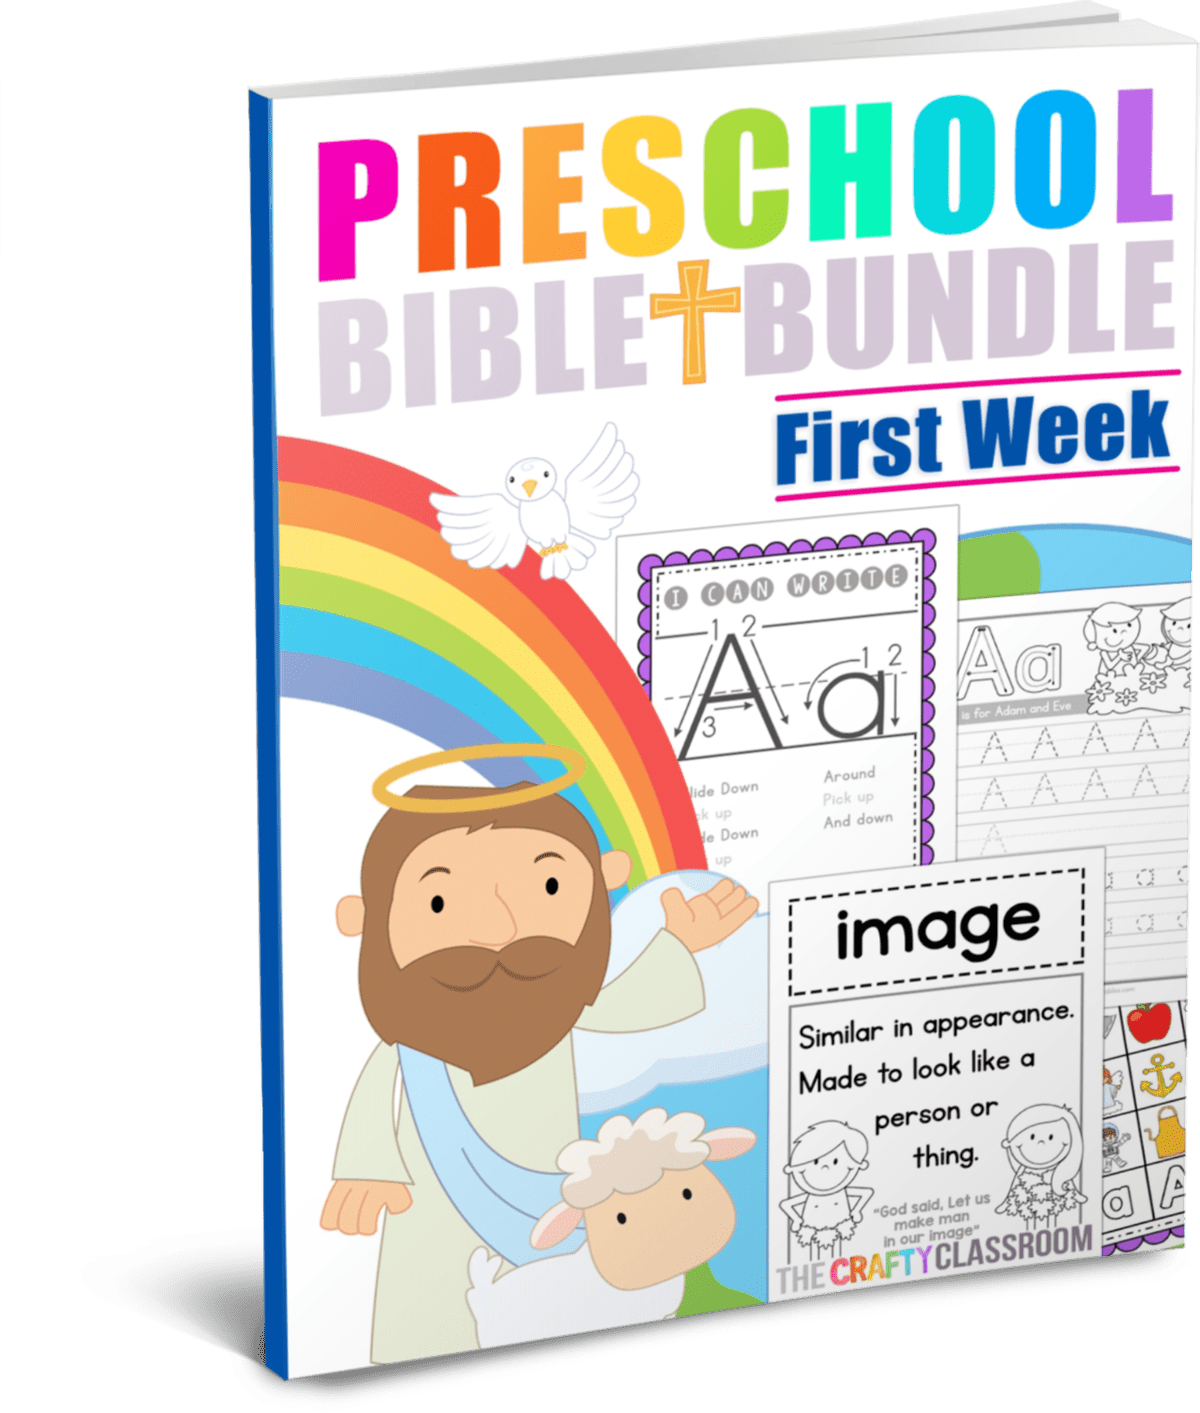 Bible Story Printables Free Bible Printables And Bible Crafts